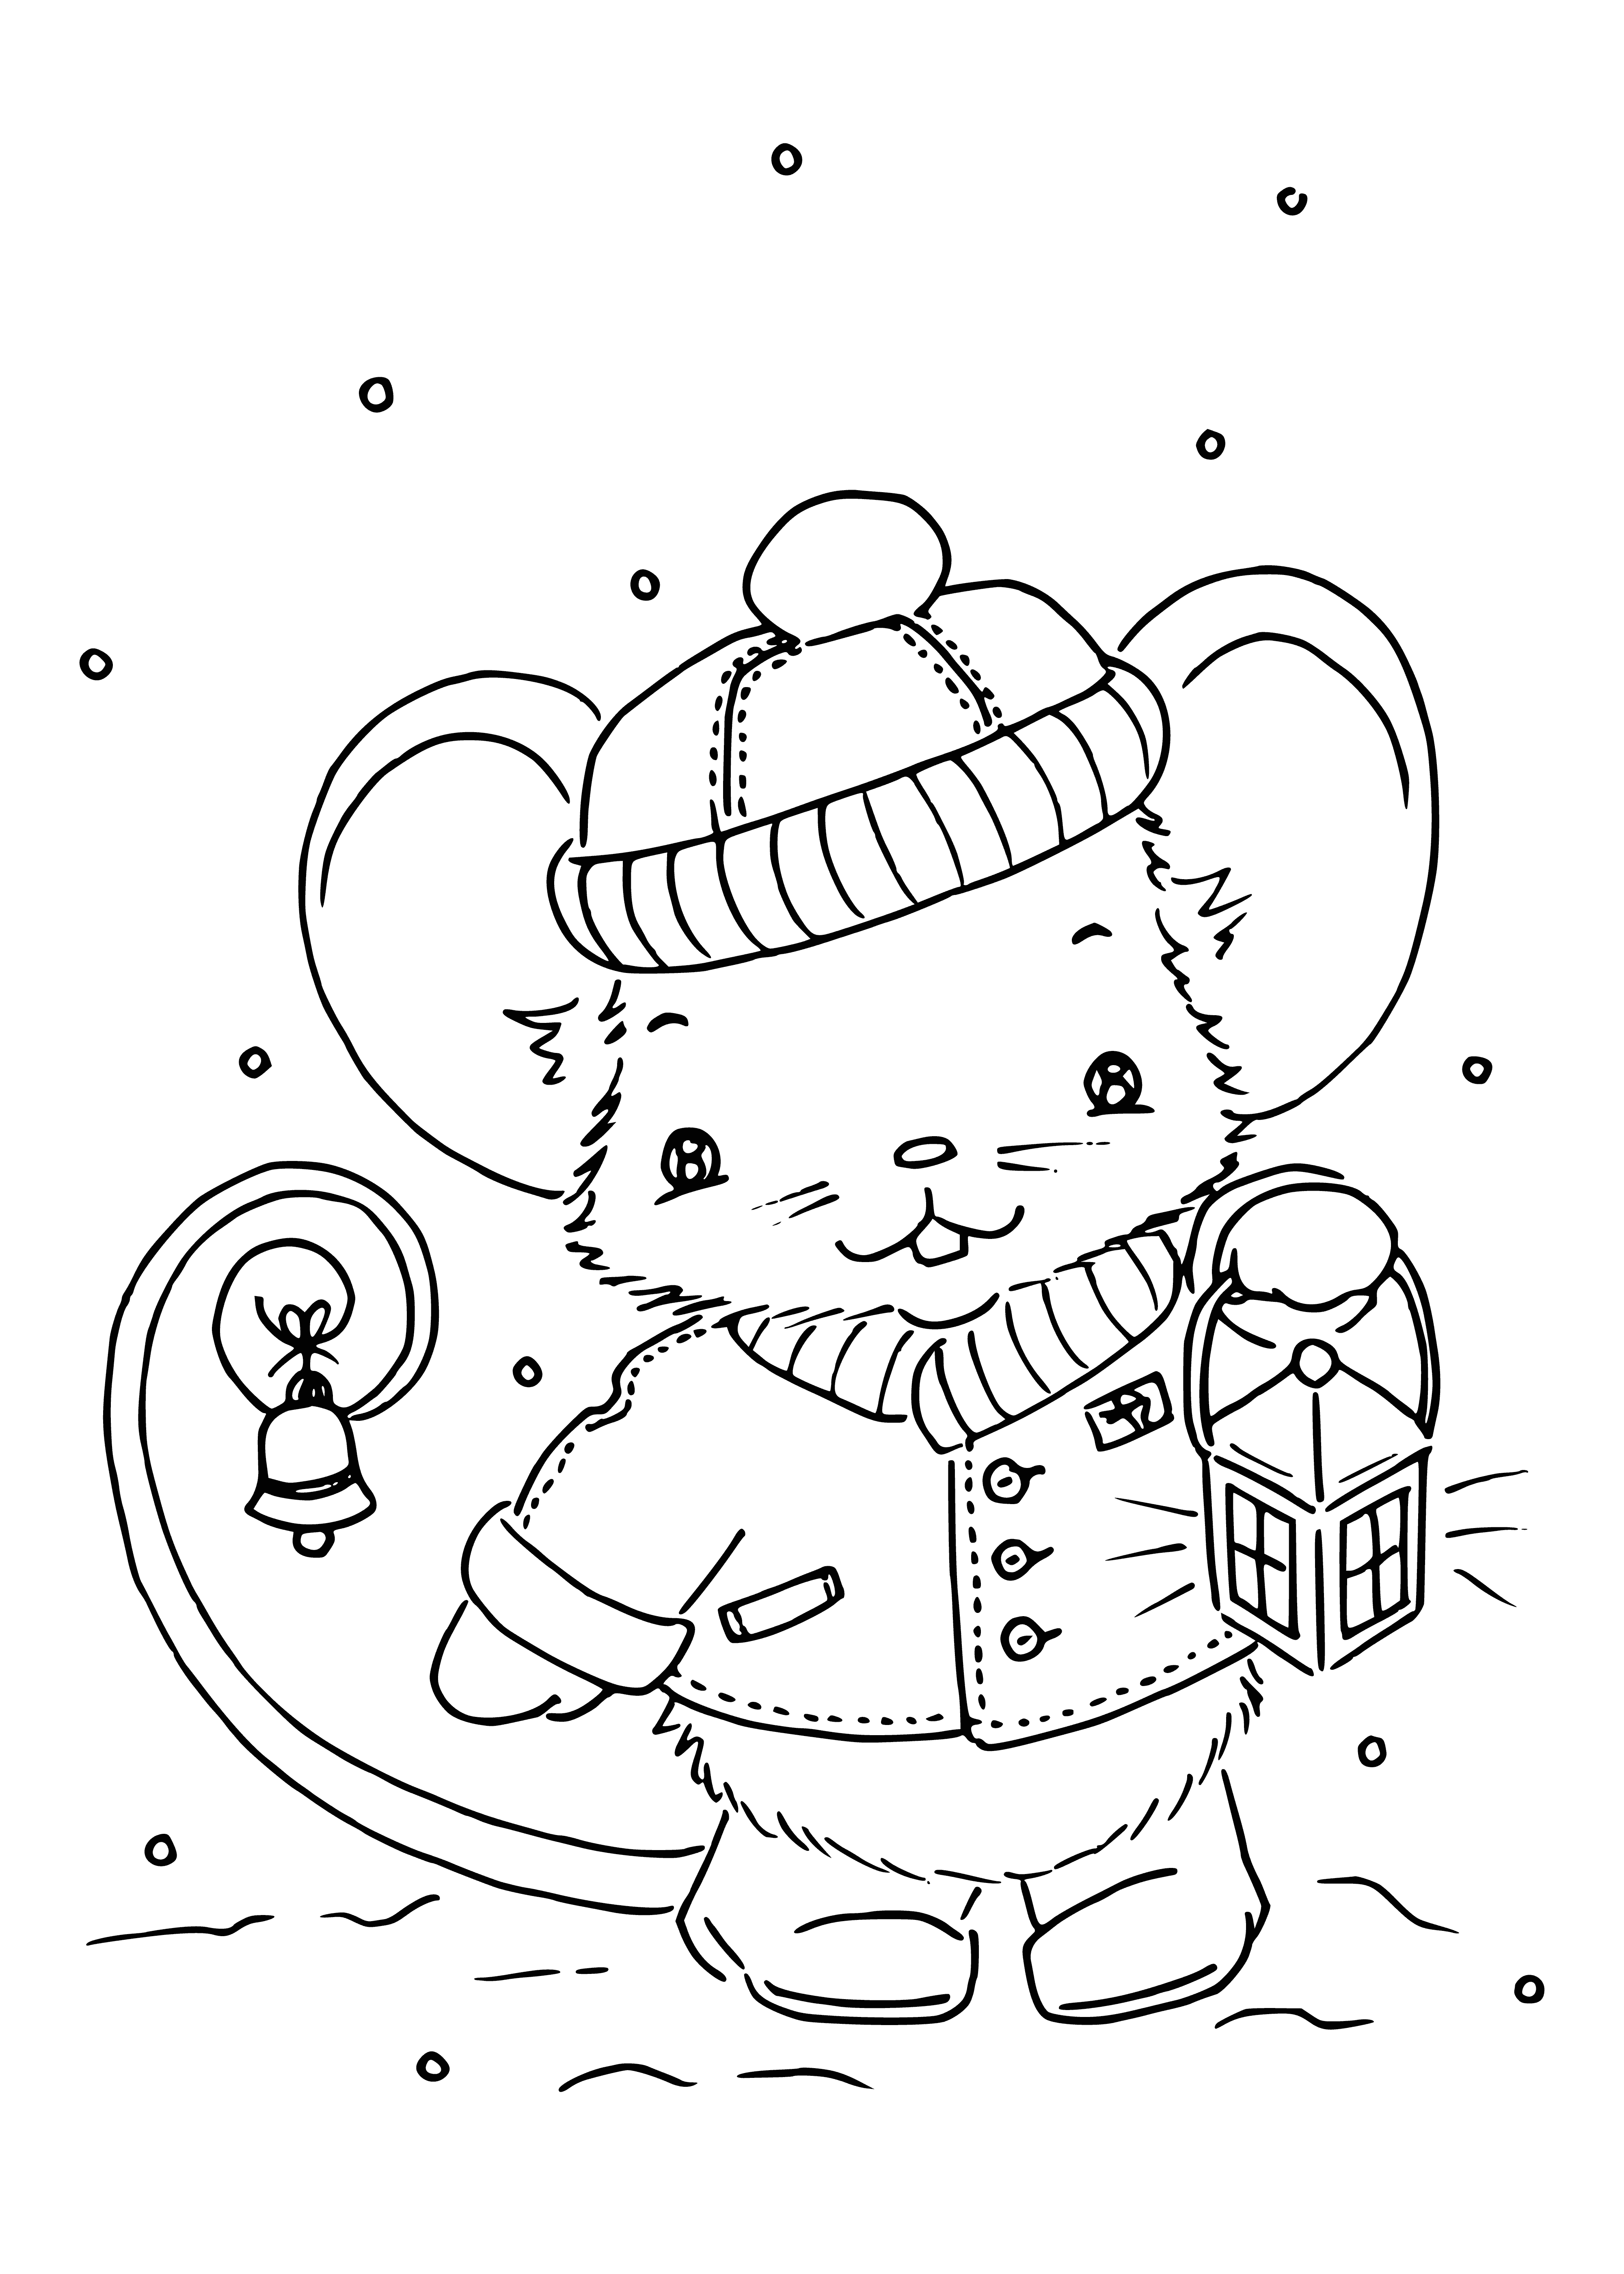 coloring page: The rat is a small, furry rodent with a long tail & black markings. Represents the year, Christmas & mouse. Symbolizes intelligence & resourcefulness.